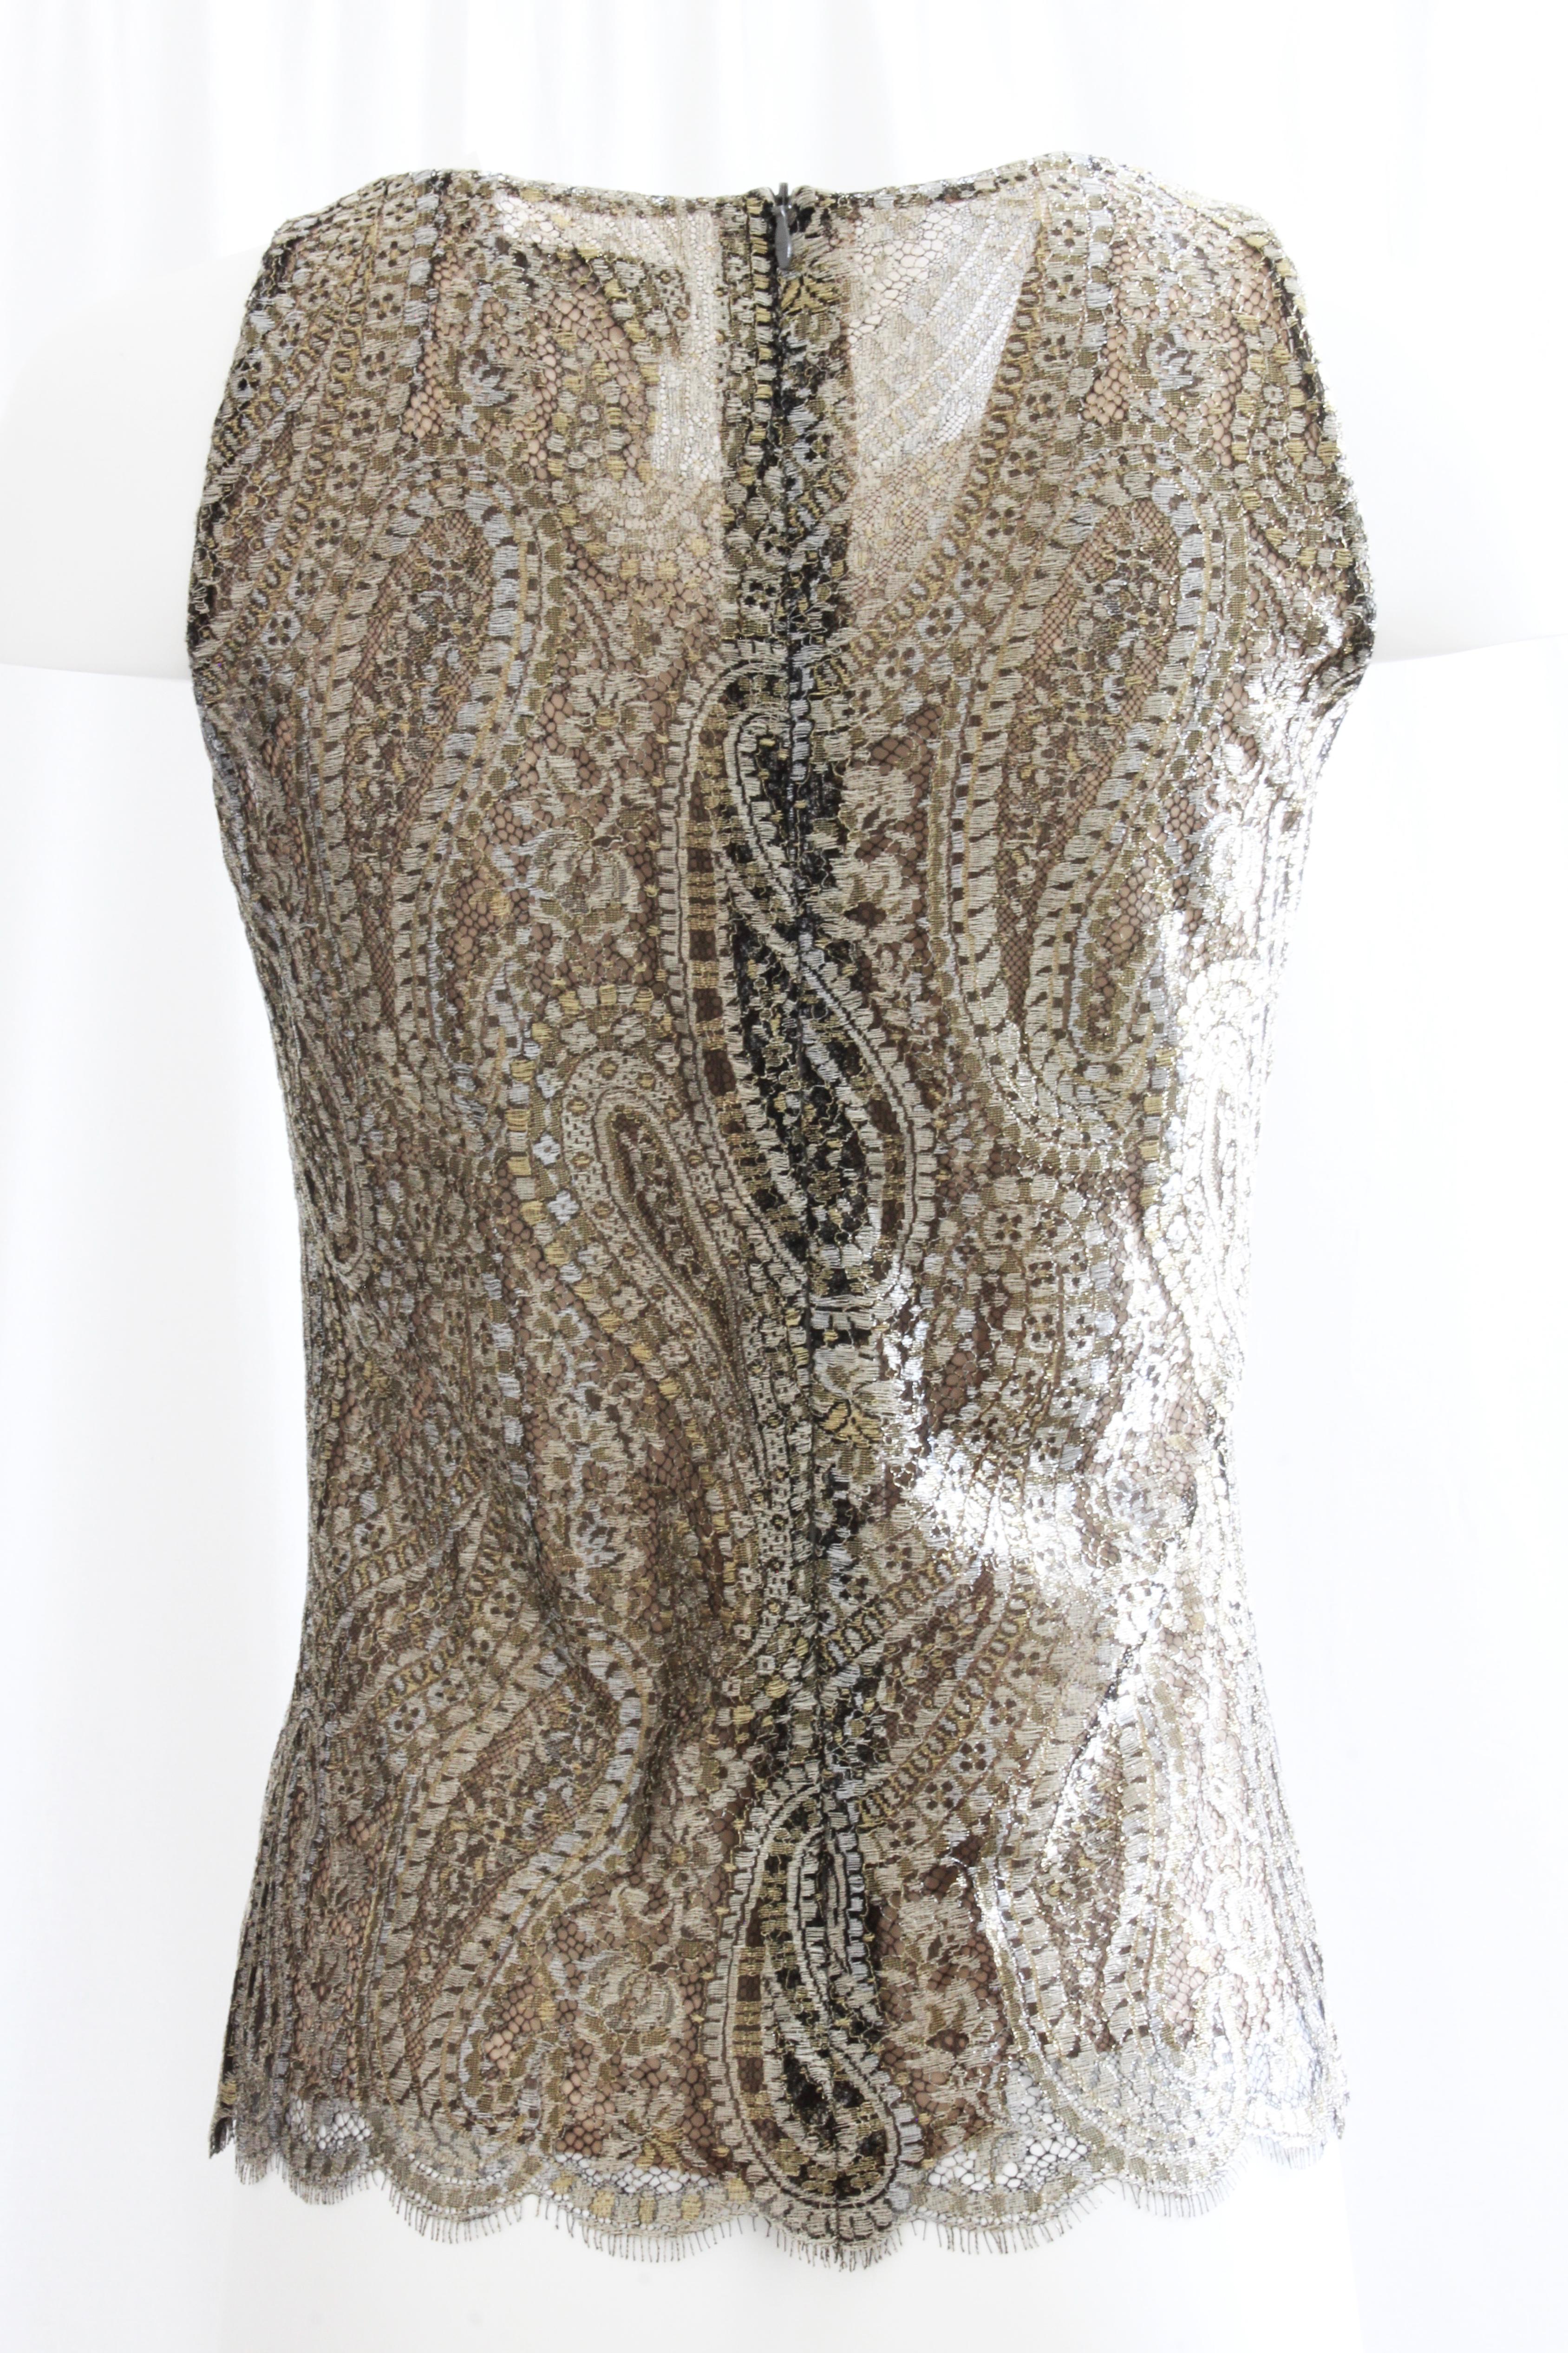 This lovely sleeveless top was made by Chanel for their 2013 collection.  Made from a stunning gold tone metallic lace in a paisley motif, it's lined in nude silk fabric.  Fastens with a hidden rear zipper and looks amazing with black (as shown in